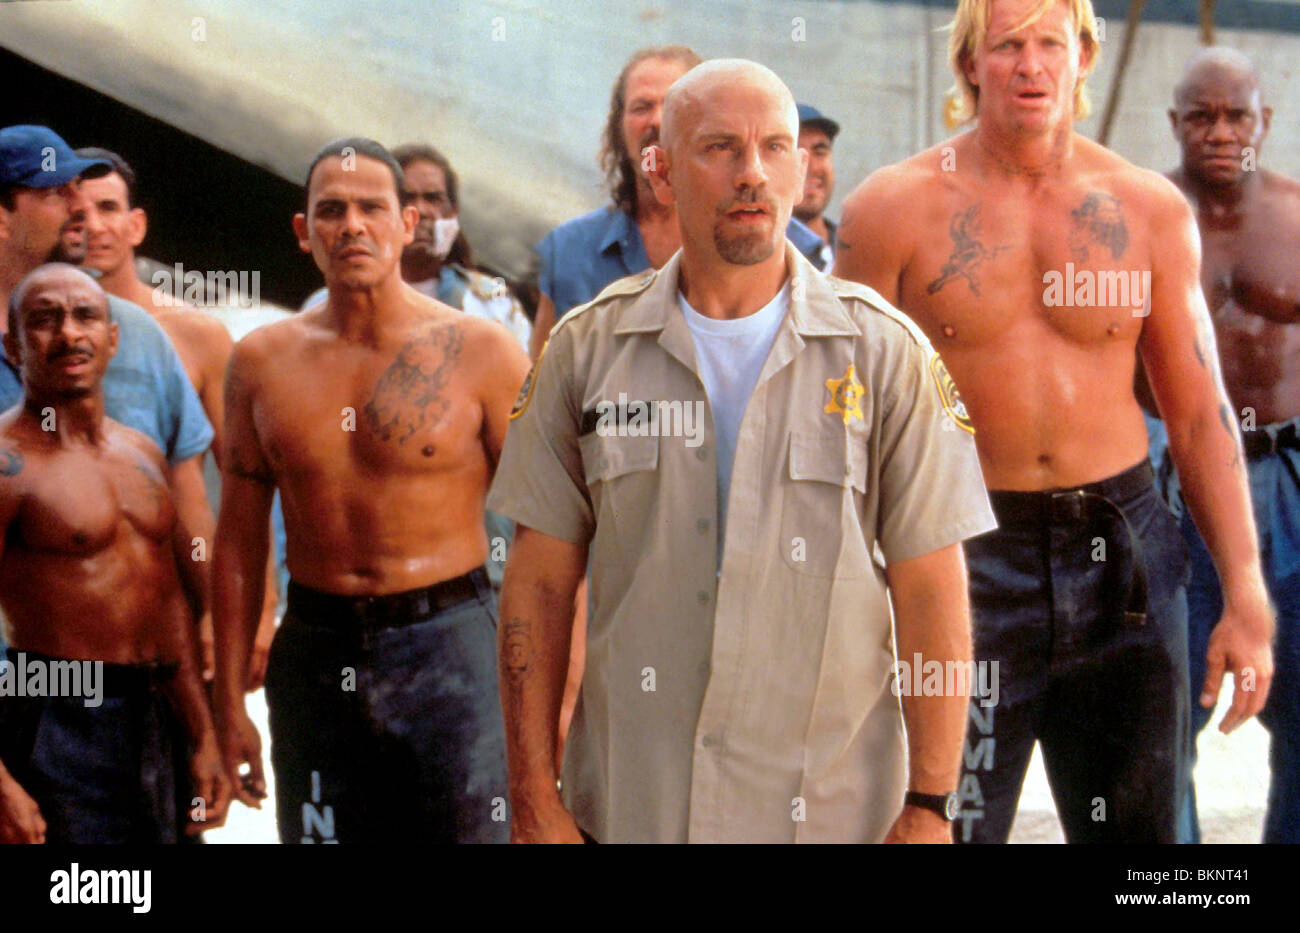 Muscles, mullets and Malkovich: has Con Air got even weirder with